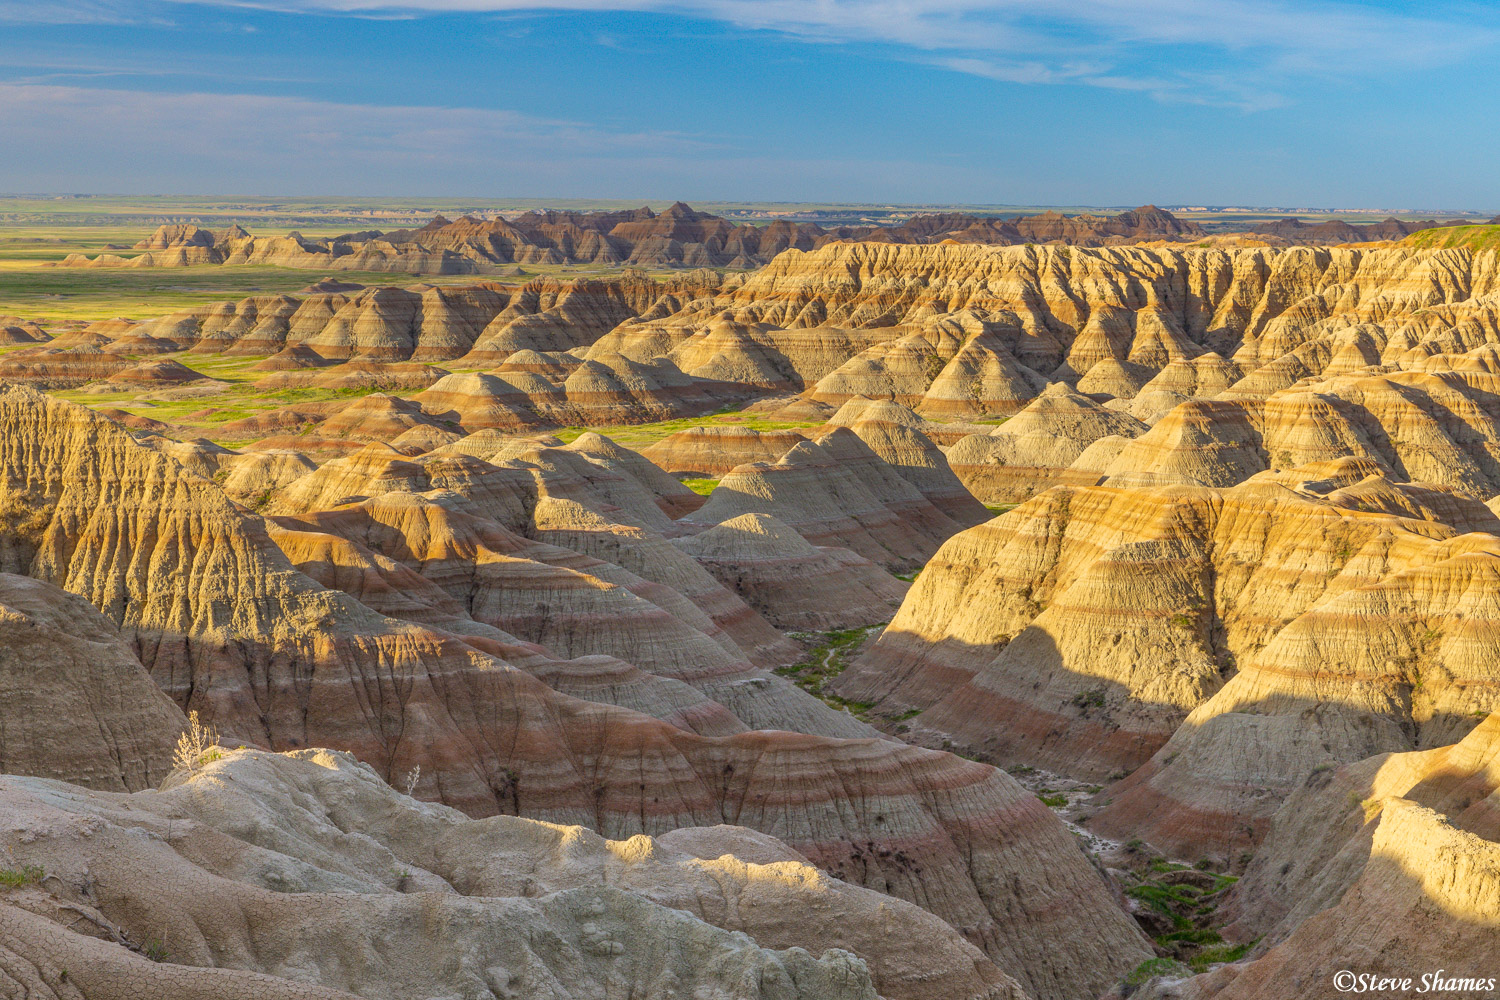 The early native Americans, along with the early settlers found this area impassable, hence the name "Badlands"